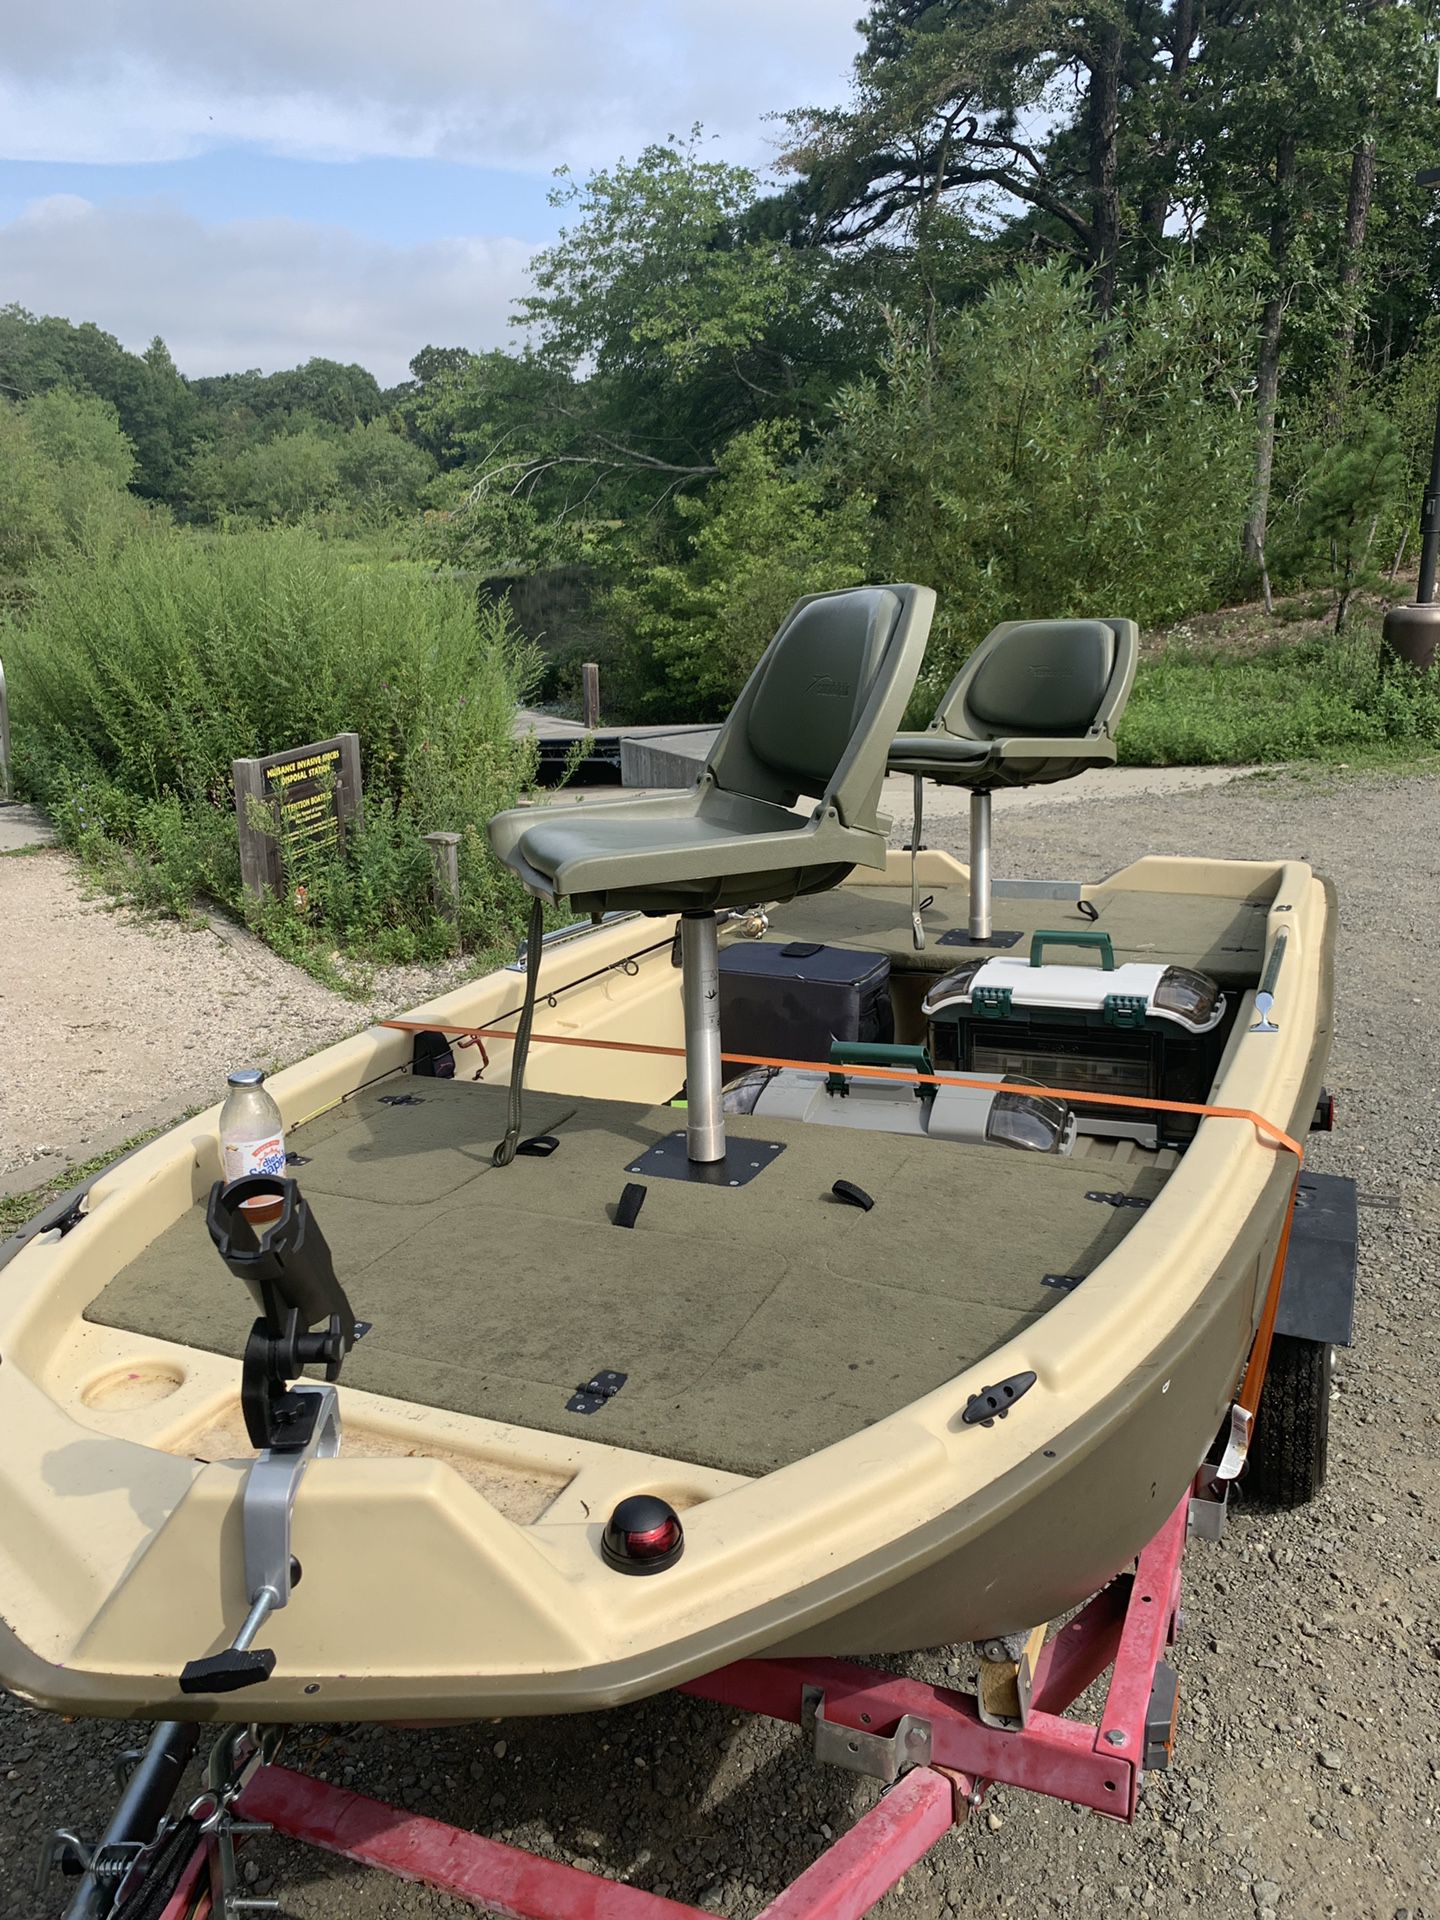 Sun Dolphin pro 120 bass boat. Includes 62 pound thrust motor trailer and battery